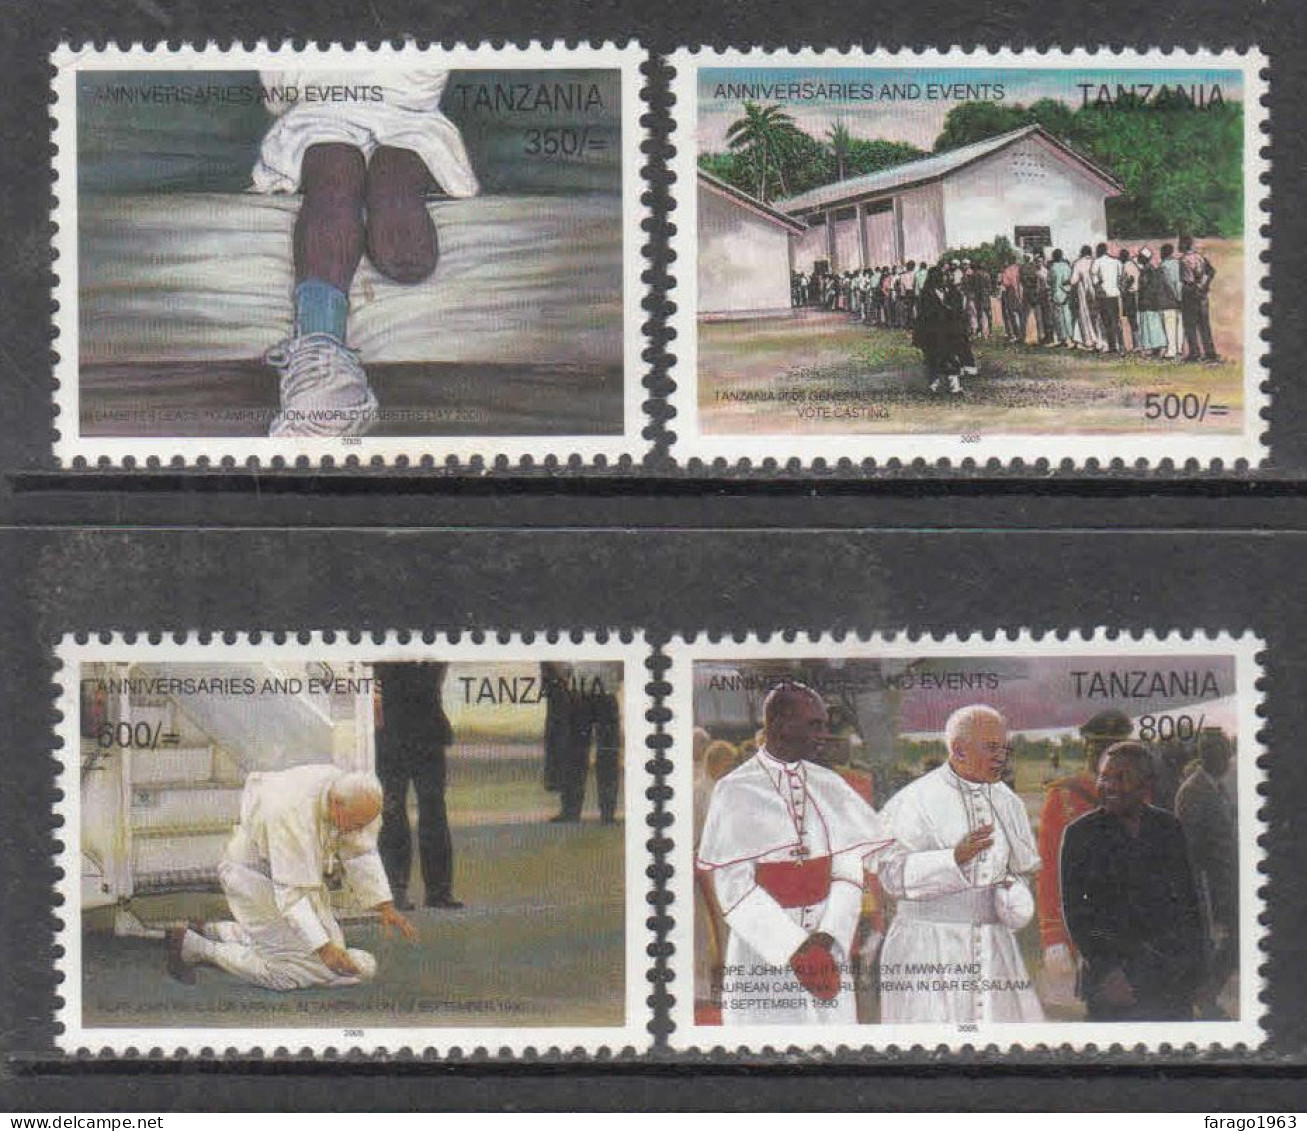 2005 Tanzania Anniversaries & Events Pope Paul II Visit Election Complete Set Of 4 MNH - Tanzania (1964-...)